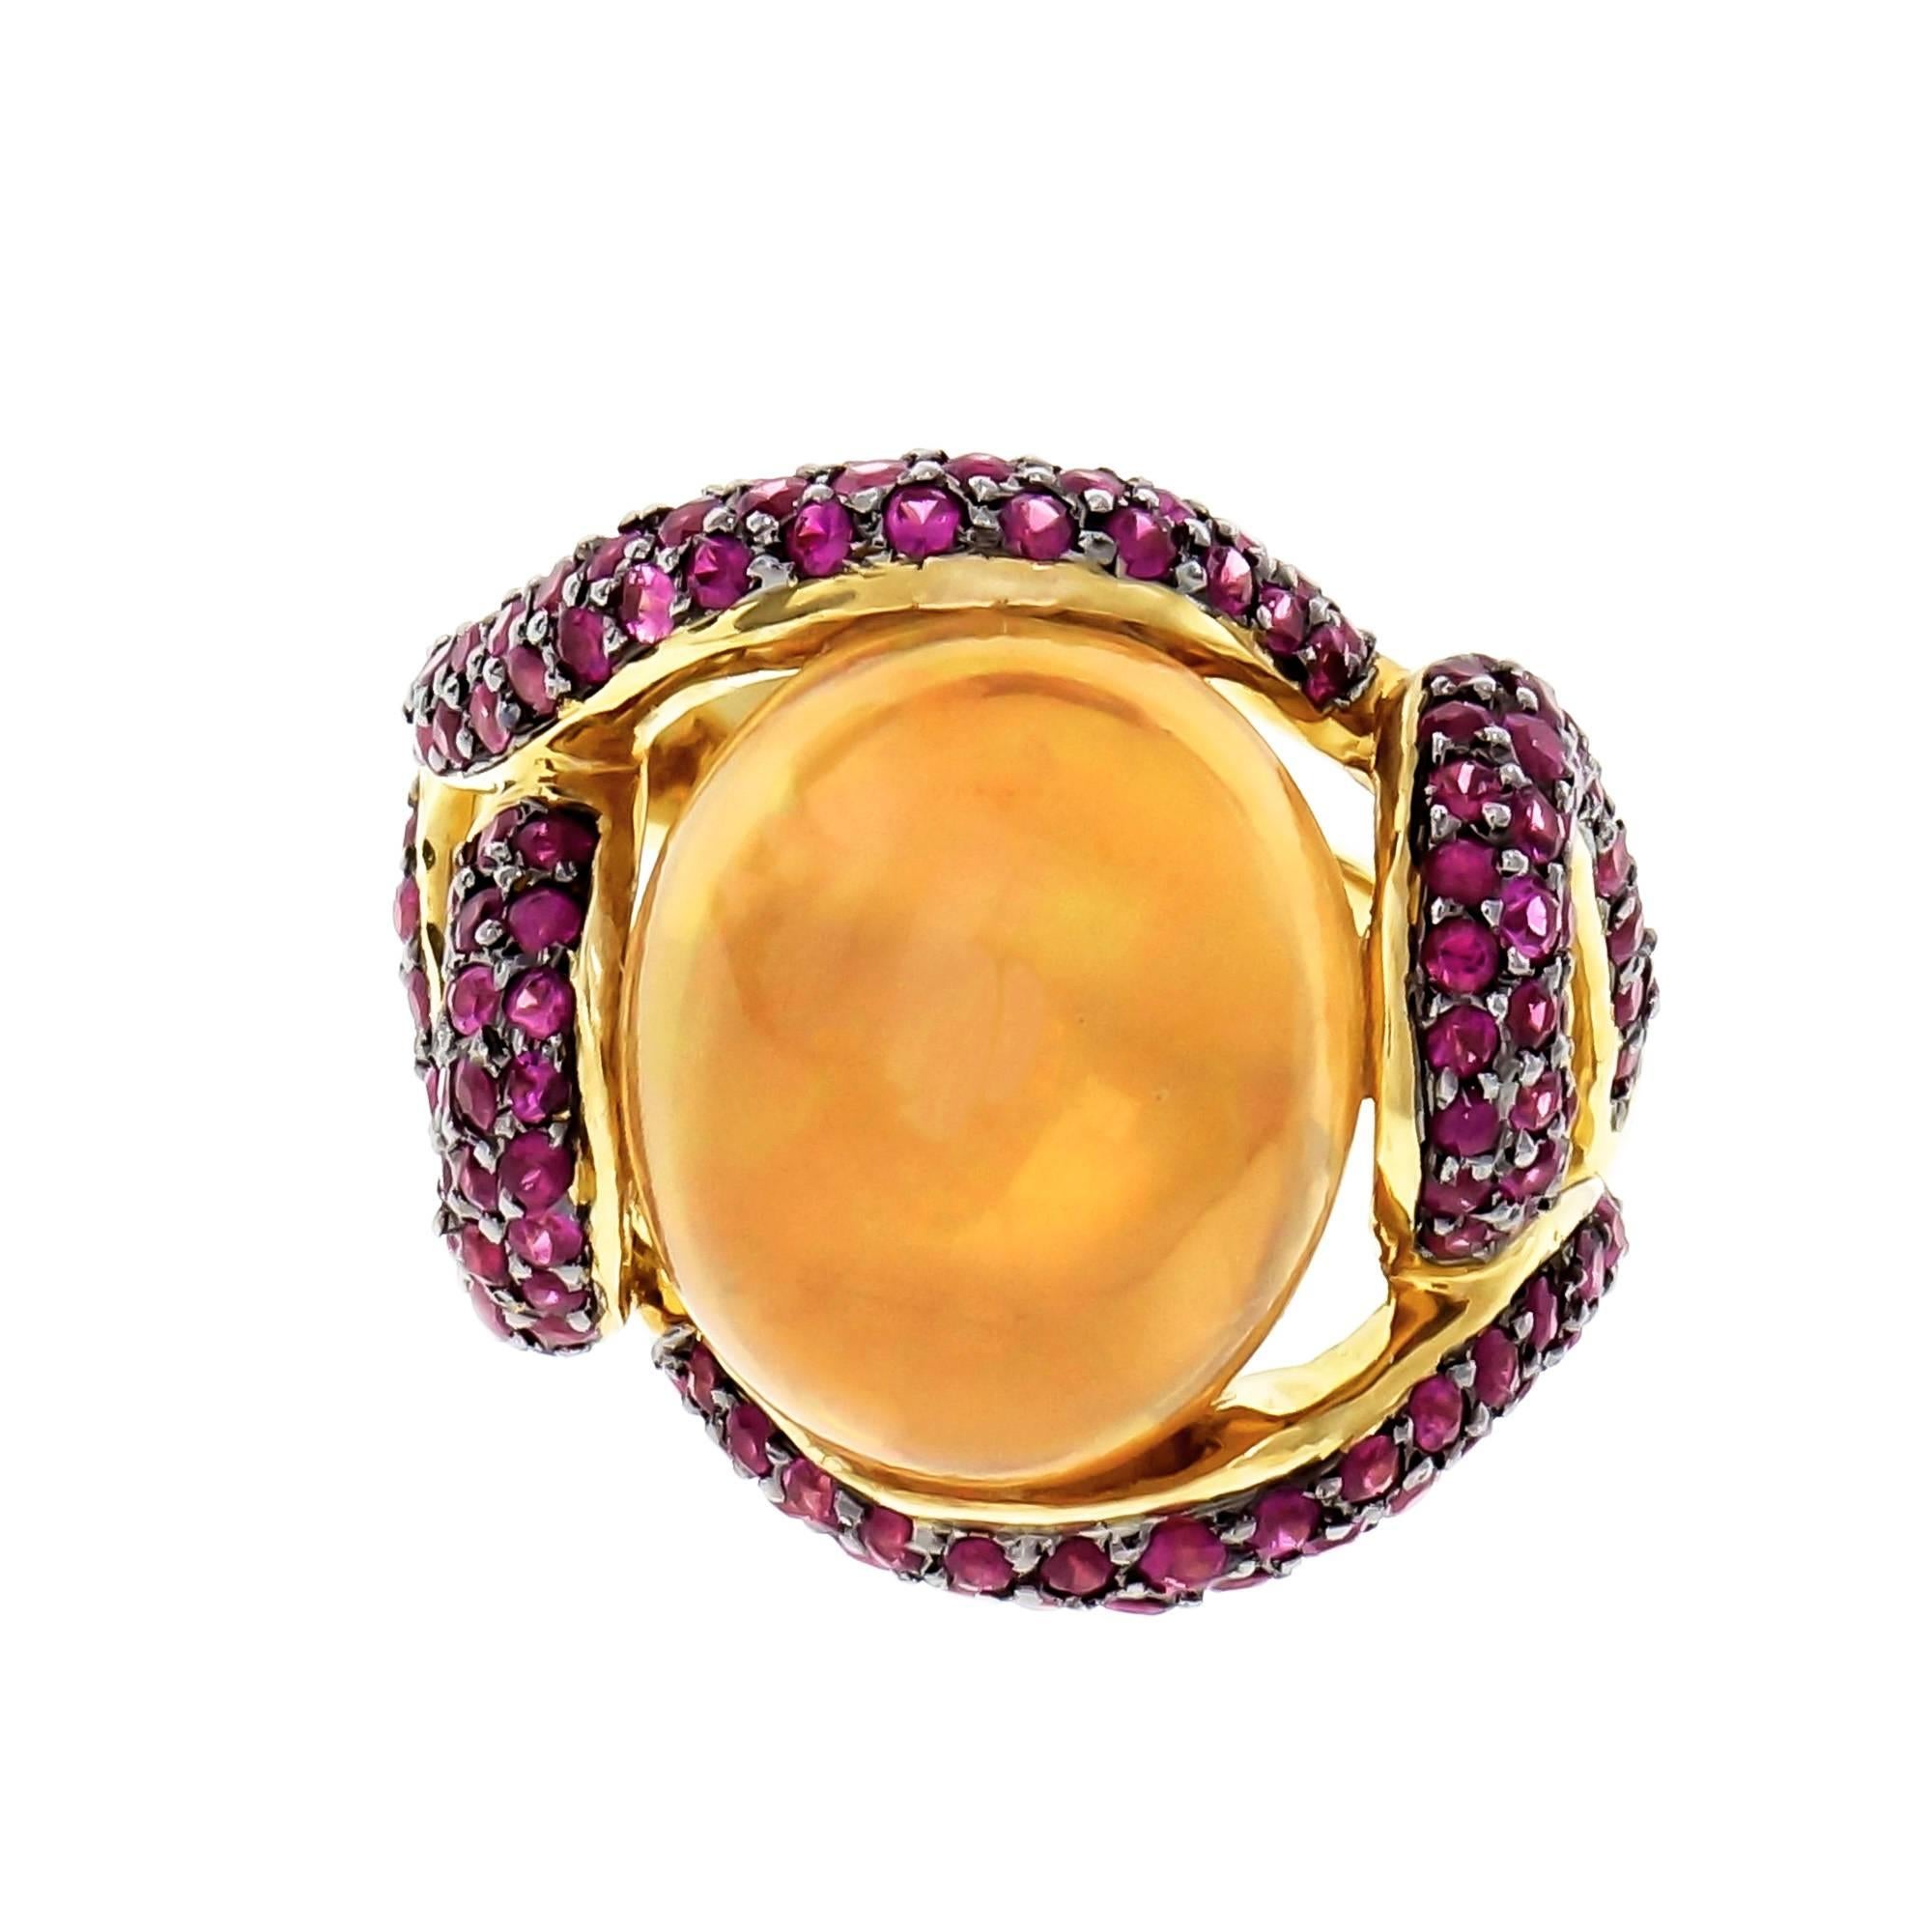 Designer Dyach Opal and ruby cocktail ring. 18k yellow gold free form swirl ring set with a natural Mexican fine Opal approx. total weight 5.00cts in a golden orange color with red green and blue flash with Pavé set with of bright red Rubies.

1